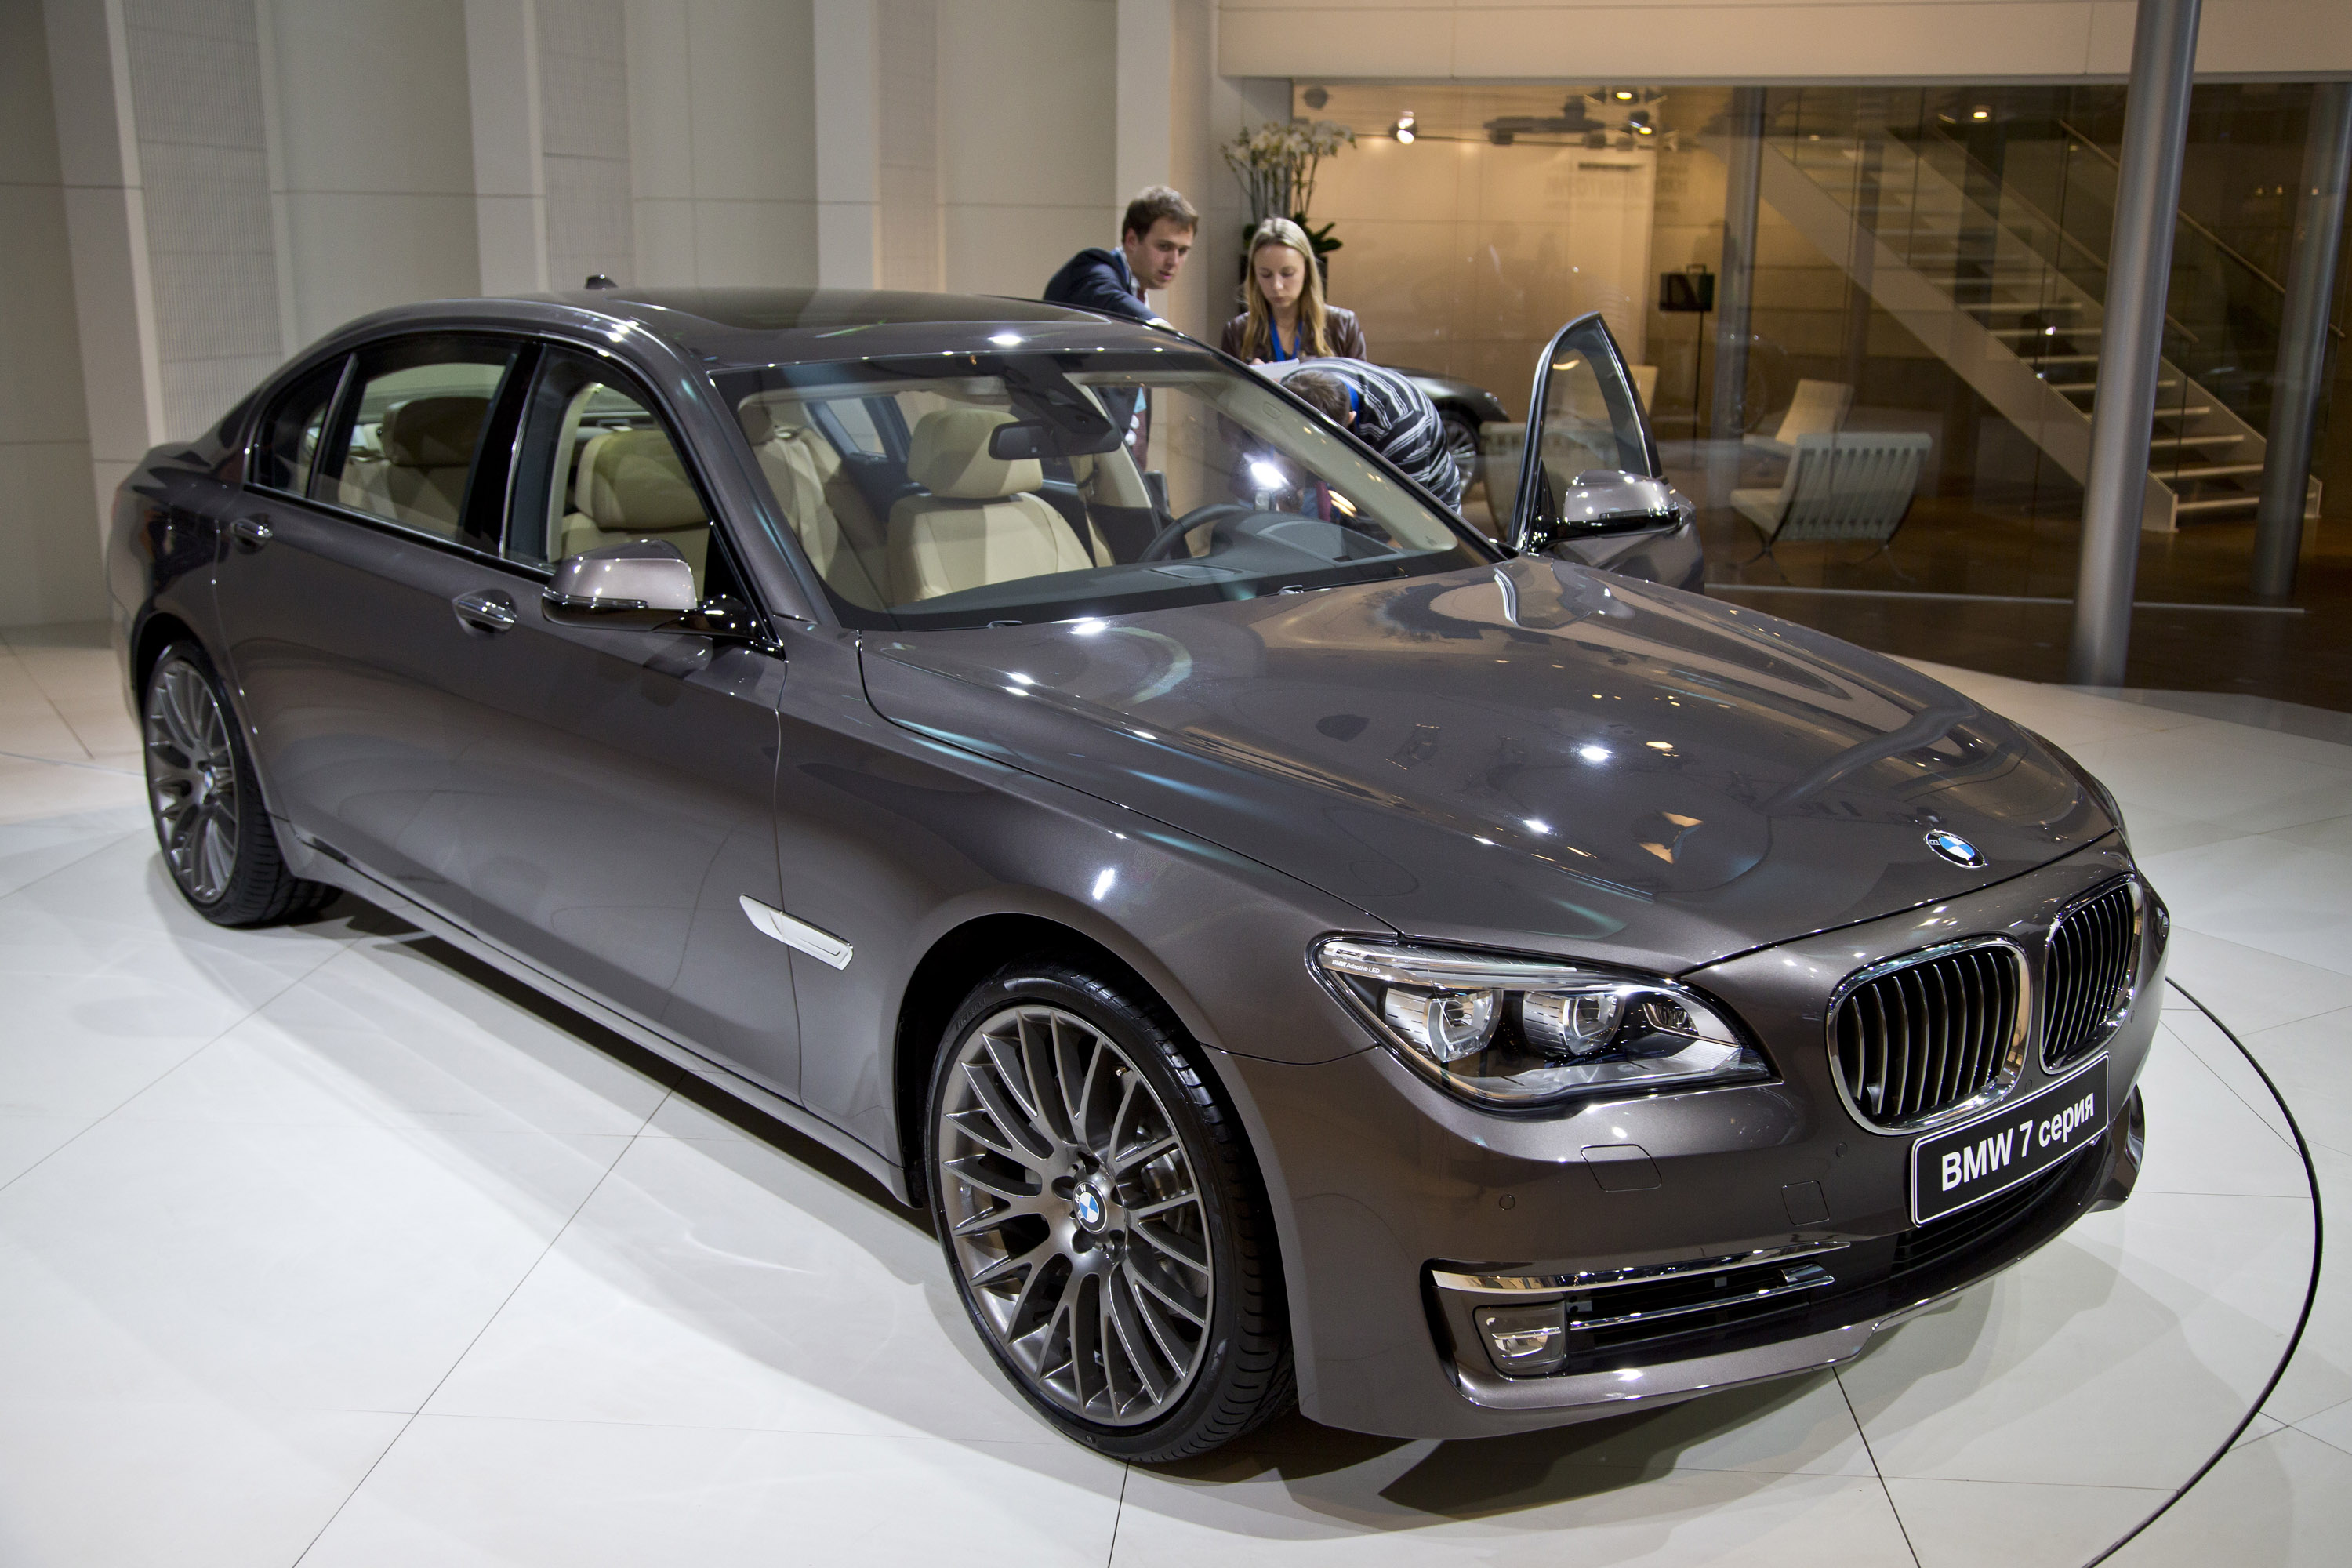 BMW 7-Series Moscow 2012 - Picture 738203000 x 2000